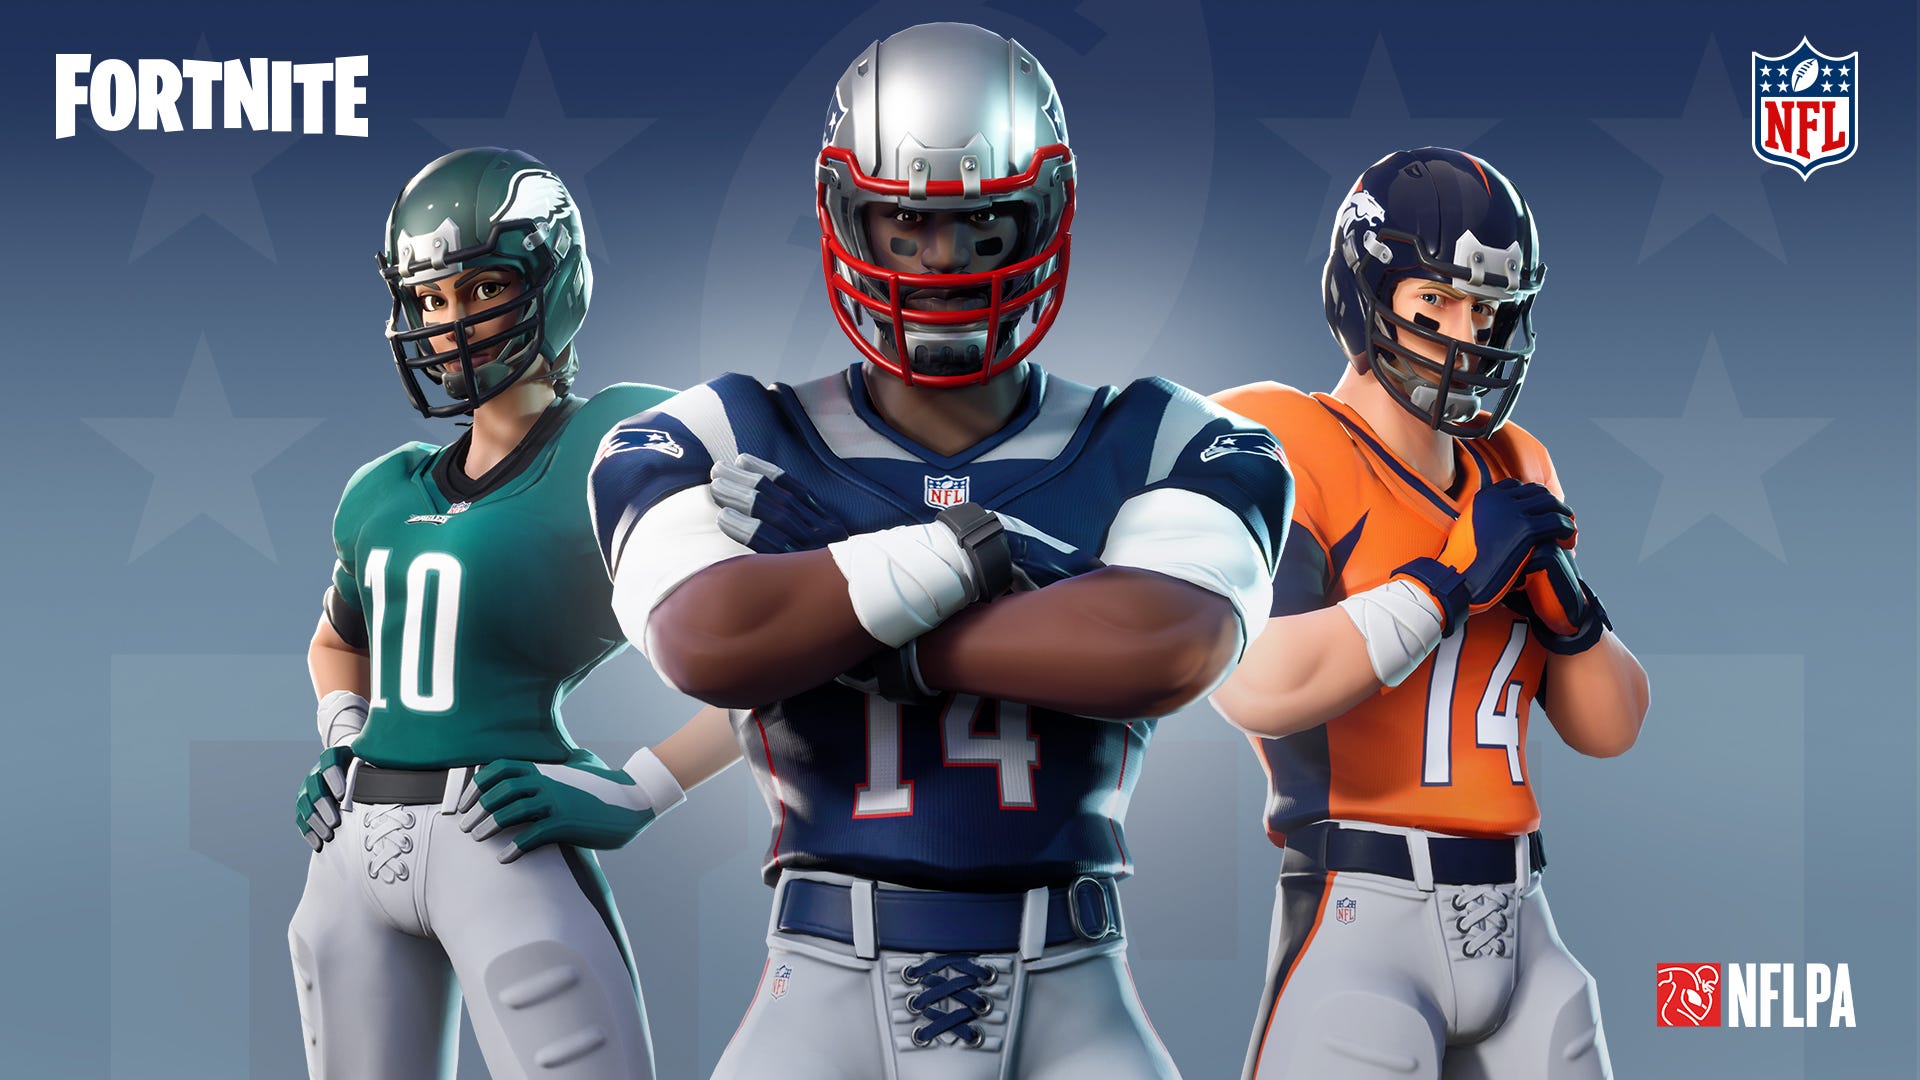 NFL uniforms and other football gear